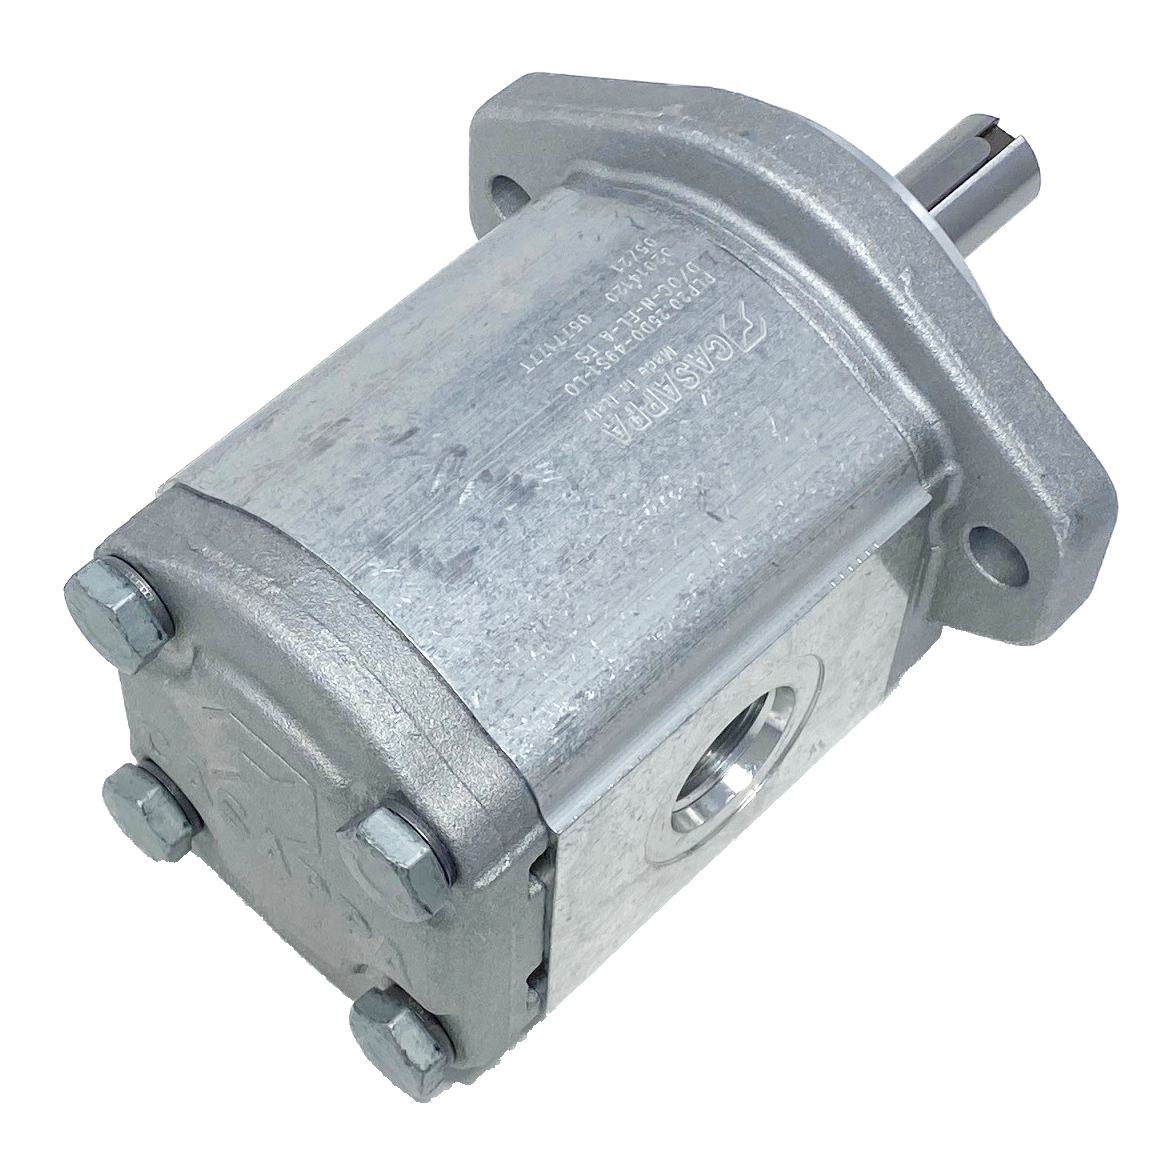 PHP20.31,5S0-49S9-LOG/OC-N-EL : Casappa Polaris Gear Pump, 33.03cc, 2900psi Rated, 2500RPM, CCW, 3/4" Bore x 3/16" Key Shaft, SAE A 2-Bolt Flange, 1.25" #20 SAE Inlet, 0.625 (5/8") #10 SAE Outlet, Cast Iron Body, Aluminum Flange